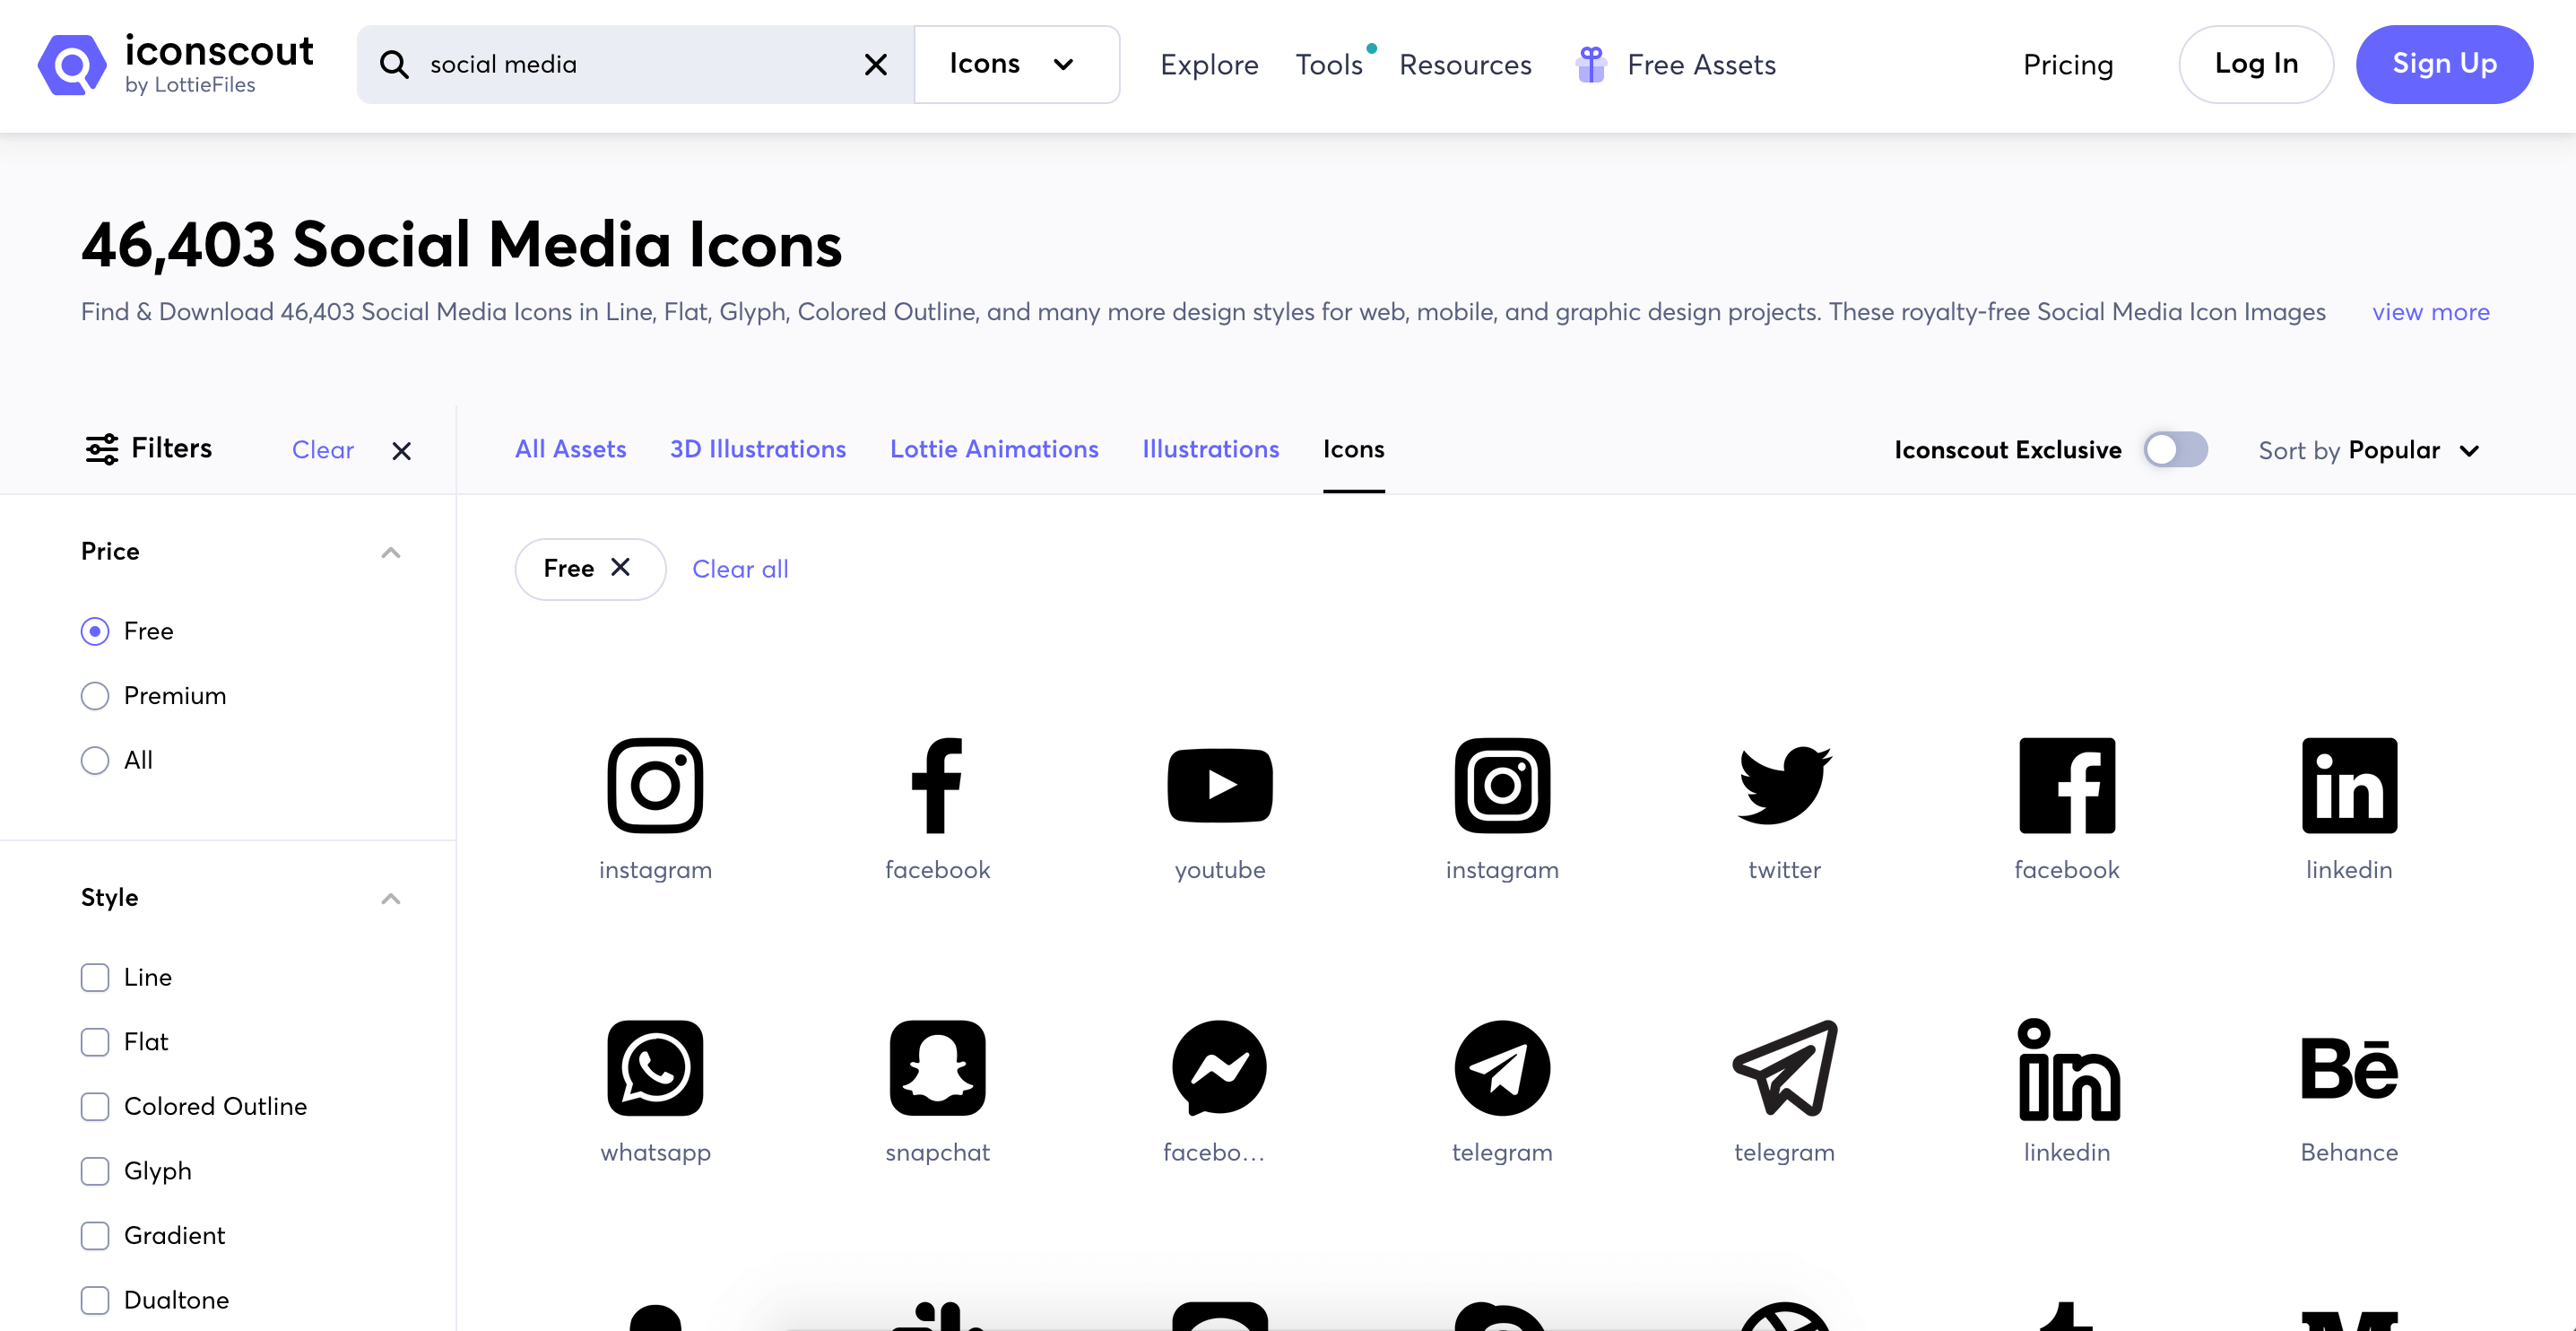 Iconscout